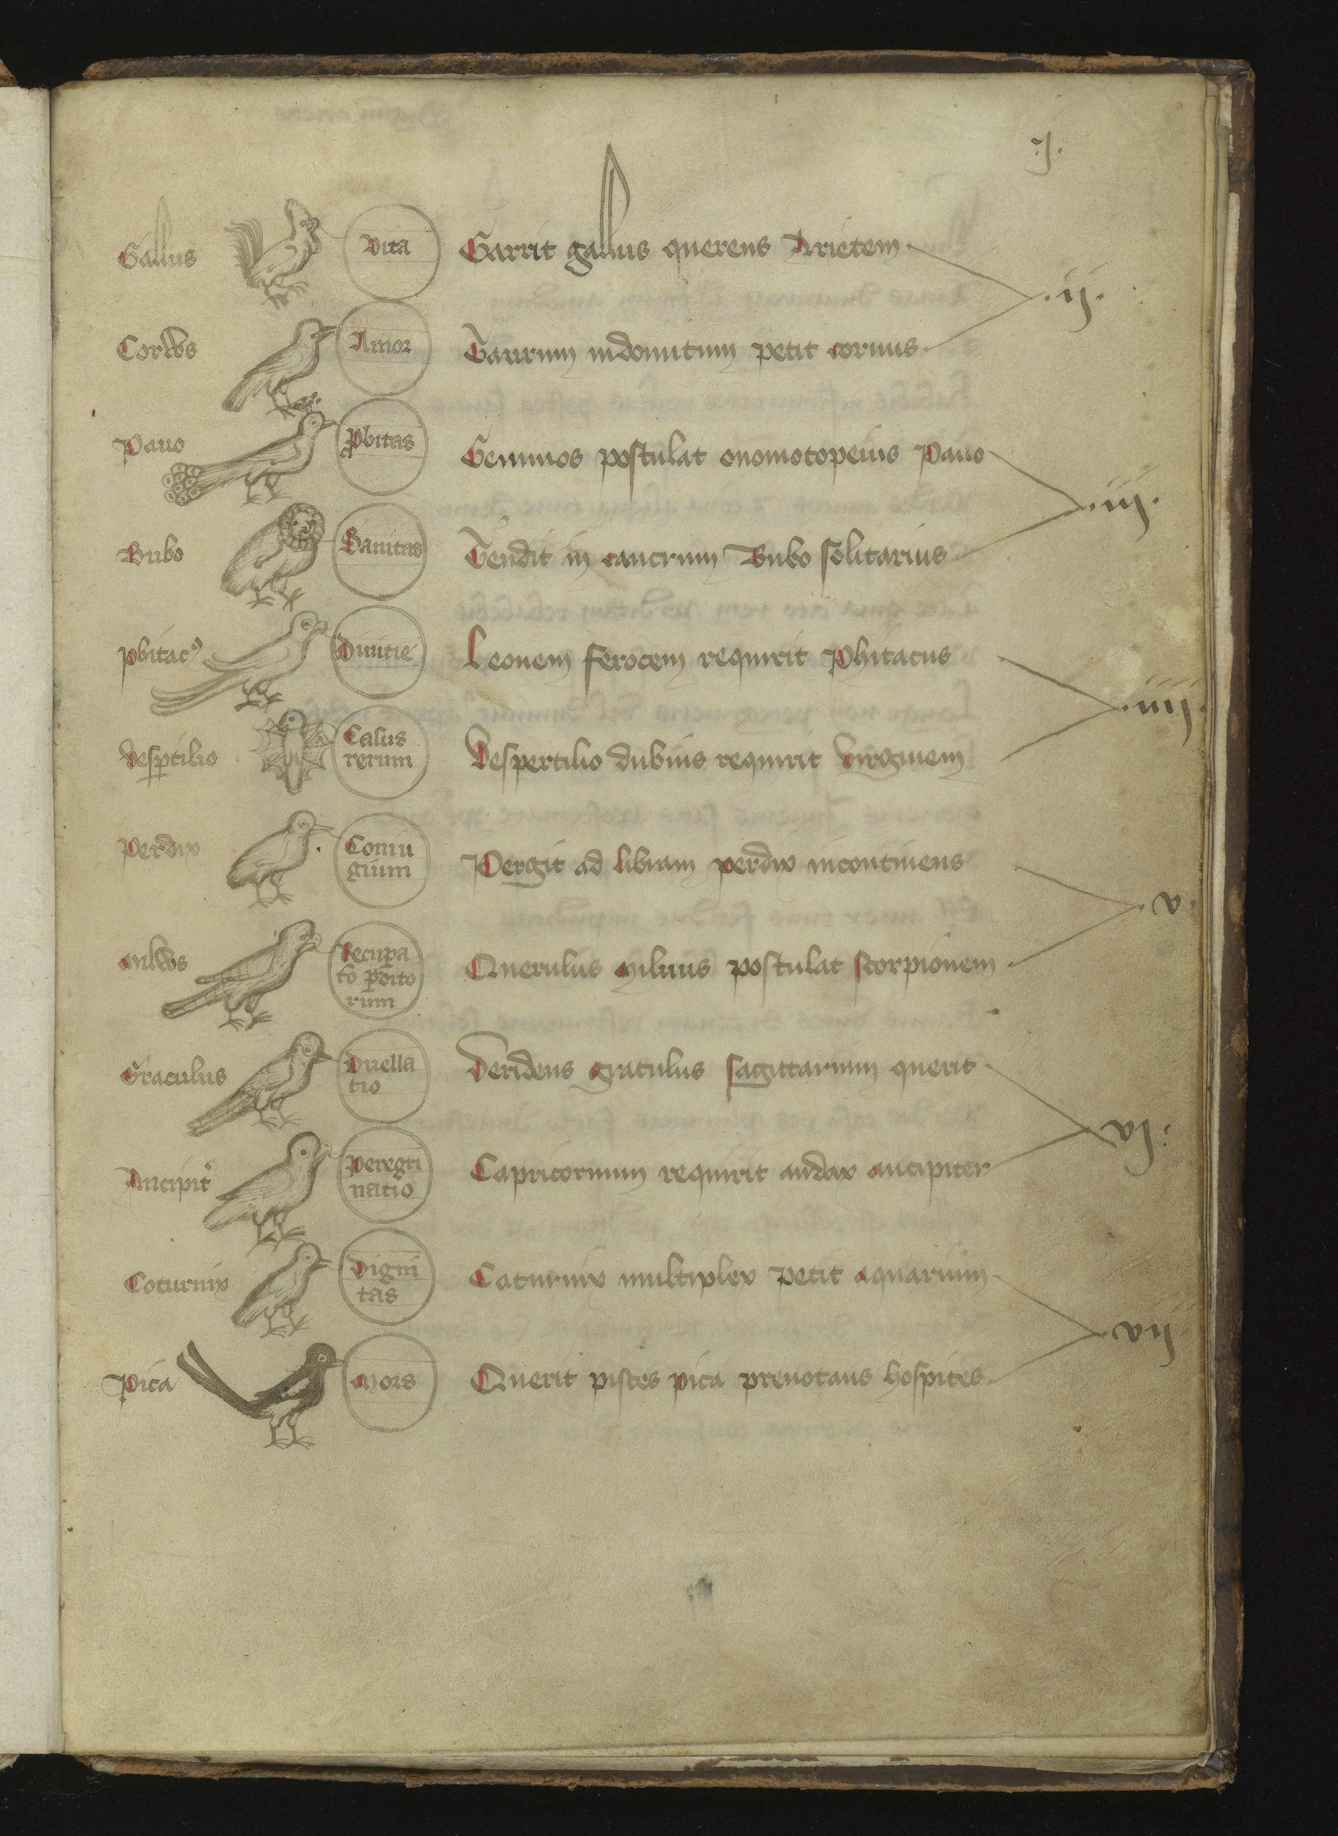 Manuscript page with sketches of birds with names, written list of qualities associated with each bird, and the zodiacal sign linked with the bird